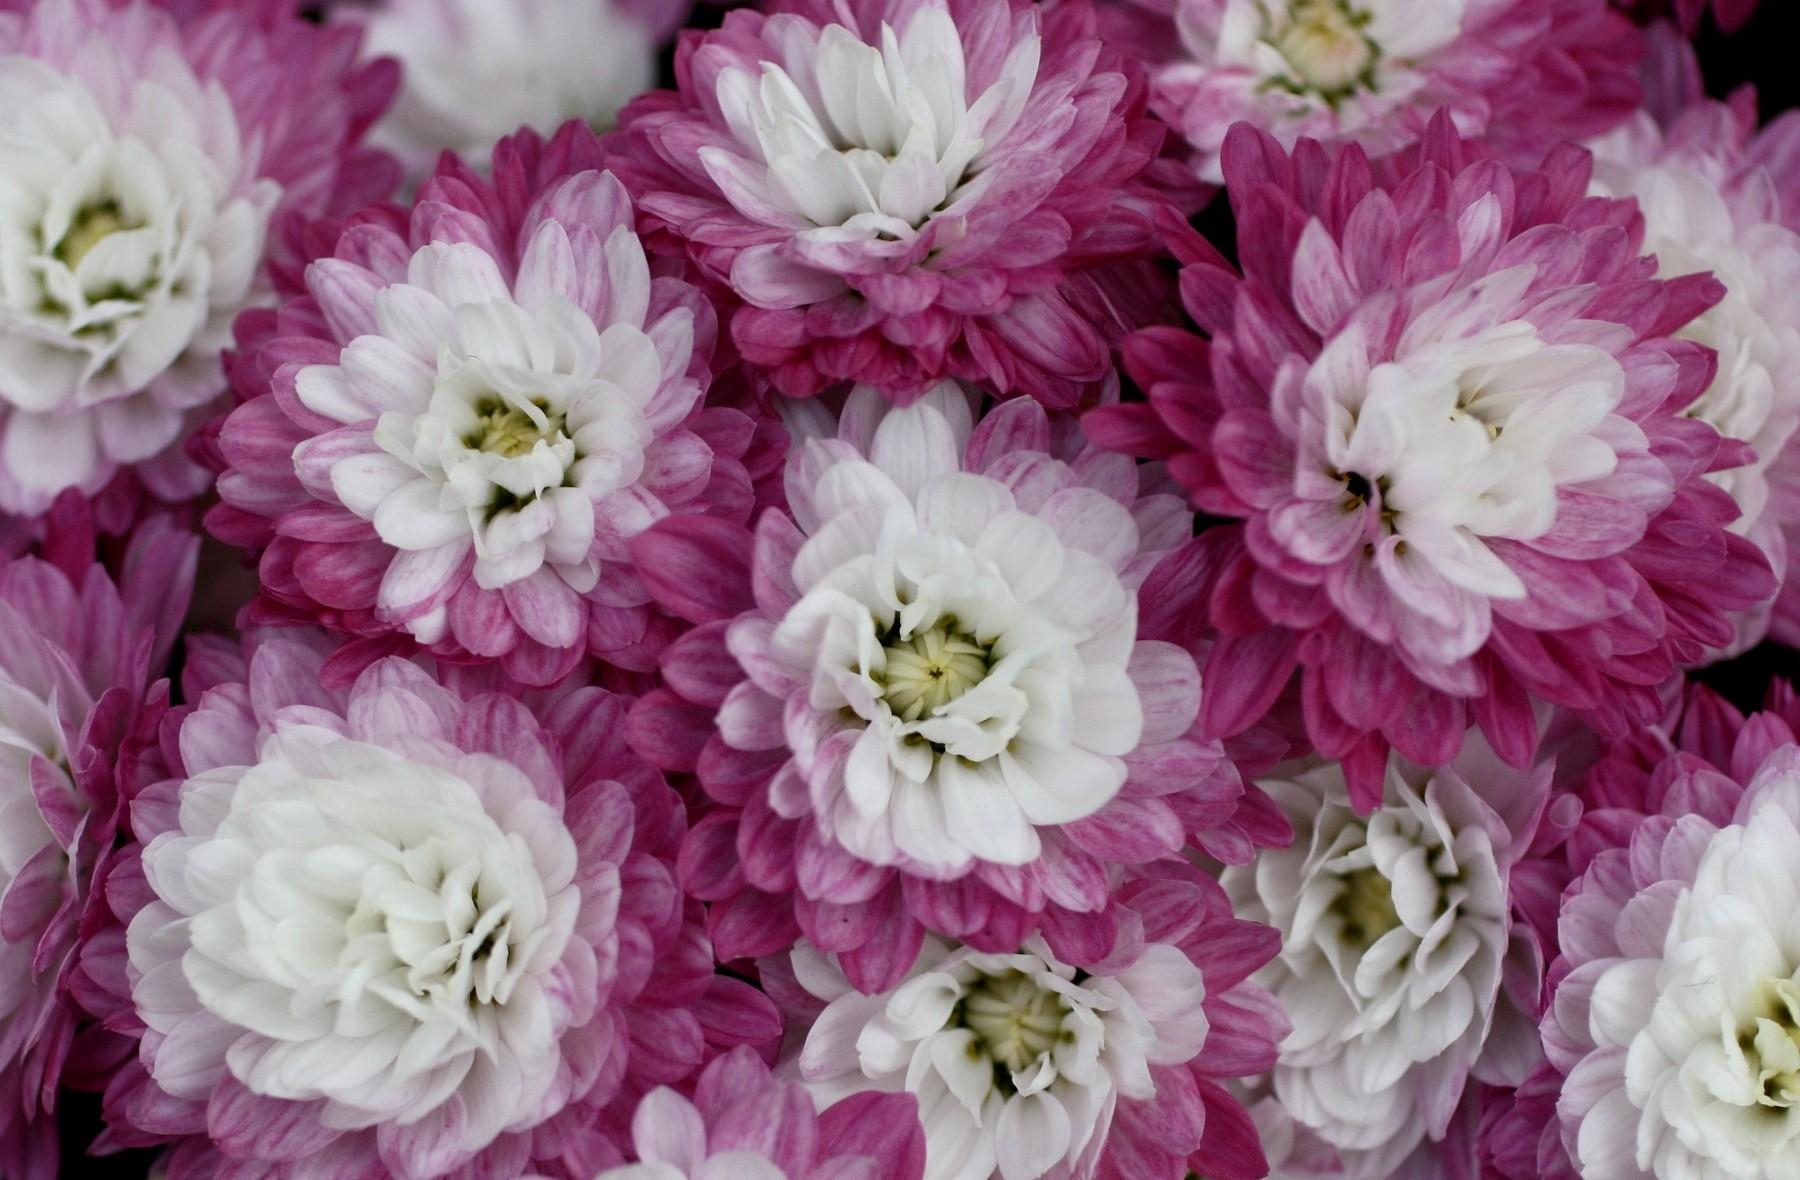 petals, flowers, chrysanthemum, close up, bicolor, two colored